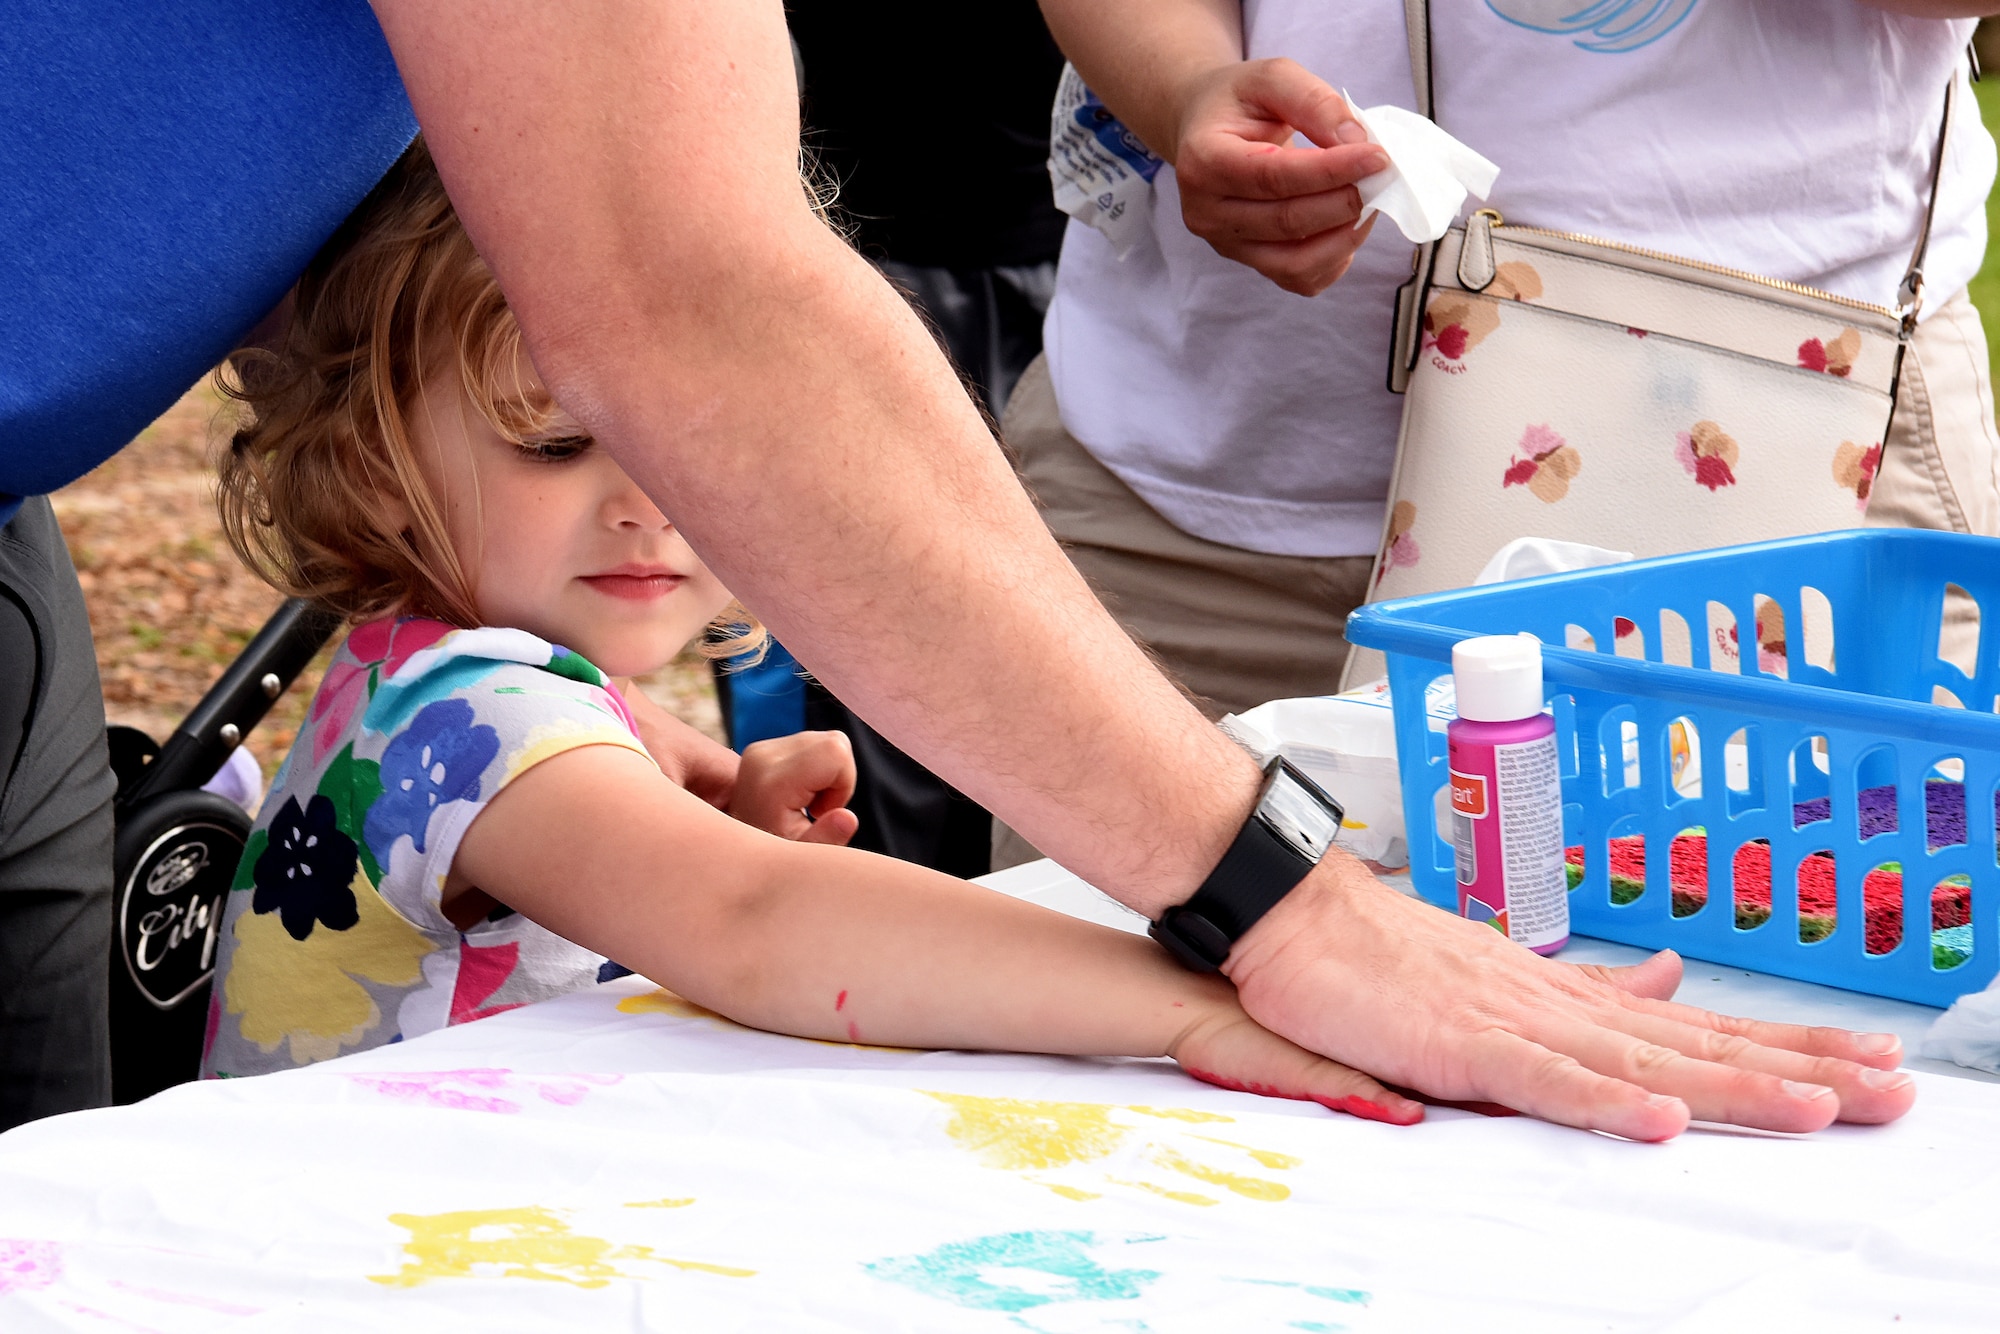 U.S. Air Force Lt. Col. John Eck, 2nd Air Force director of staff, and his daughter, Natalie, paints a handprint during Easter in the Park at Marina Park March 24, 2018, on Keesler Air Force Base, Mississippi. The event festivities included a parade, an Easter egg hunt, arts and crafts and informational booths. (U.S. Air Force photo by Airman 1st Class Suzie Plotnikov)